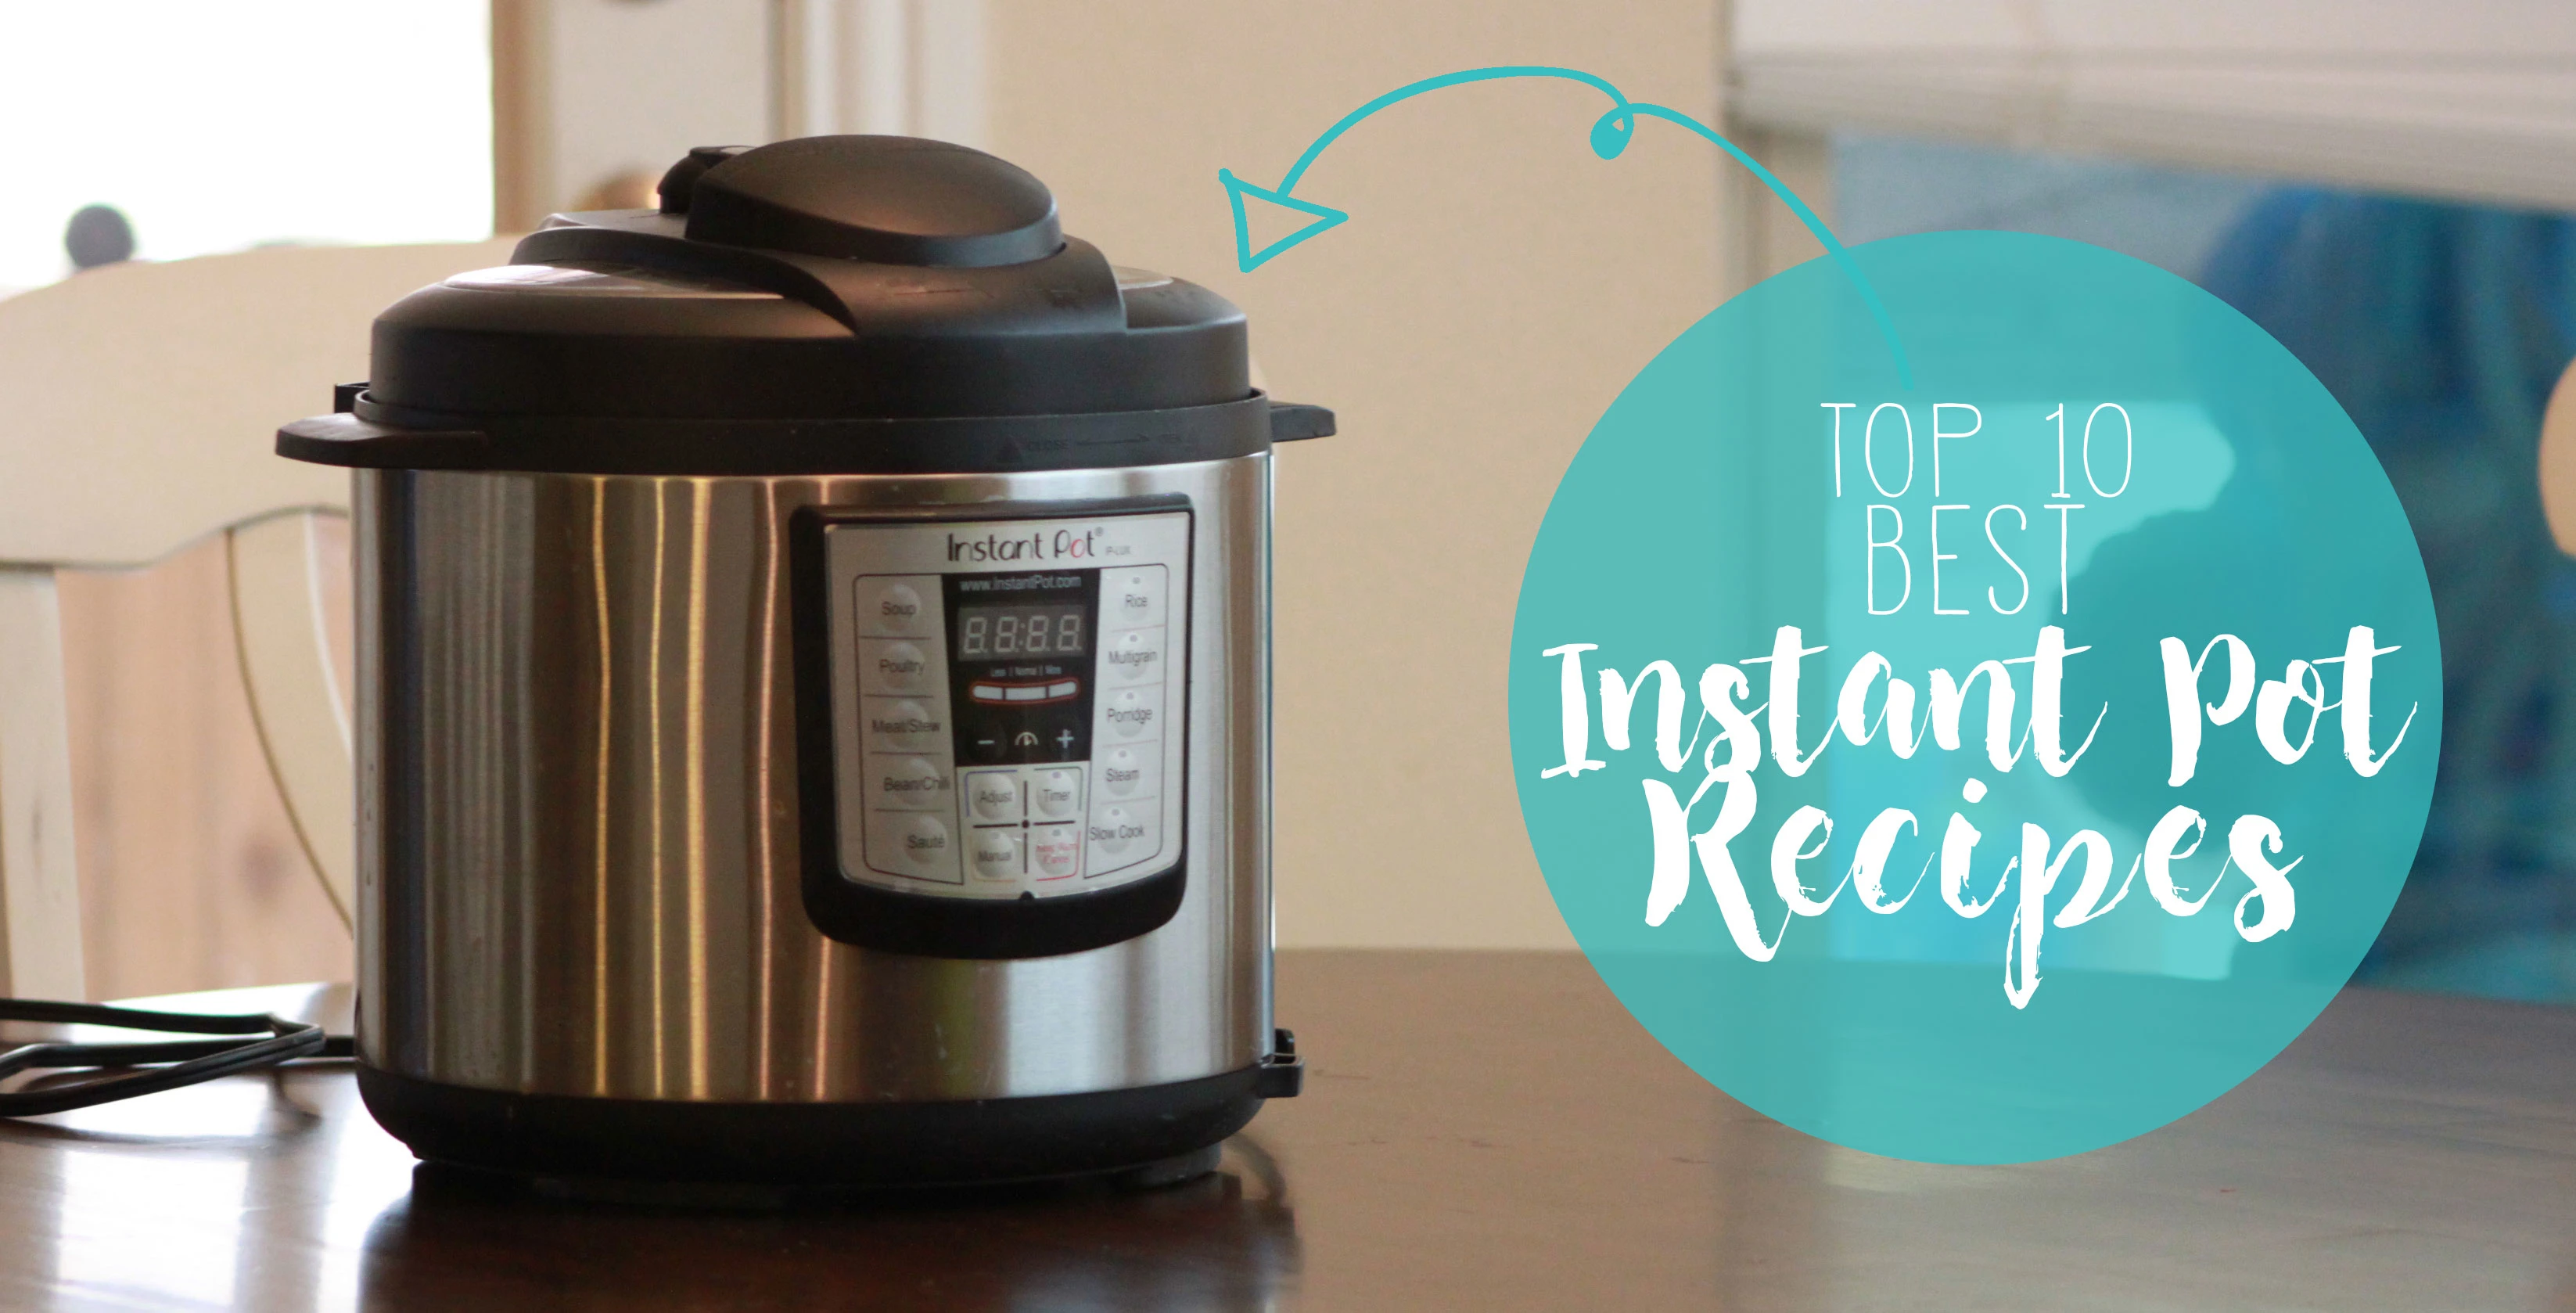 These are the 10 BEST Instant Pot / Pressure Cooker recipes on the internet! Breakfast, dinners & desserts, all in your Instant Pot. Great starter recipes too, if you're a newbie :)